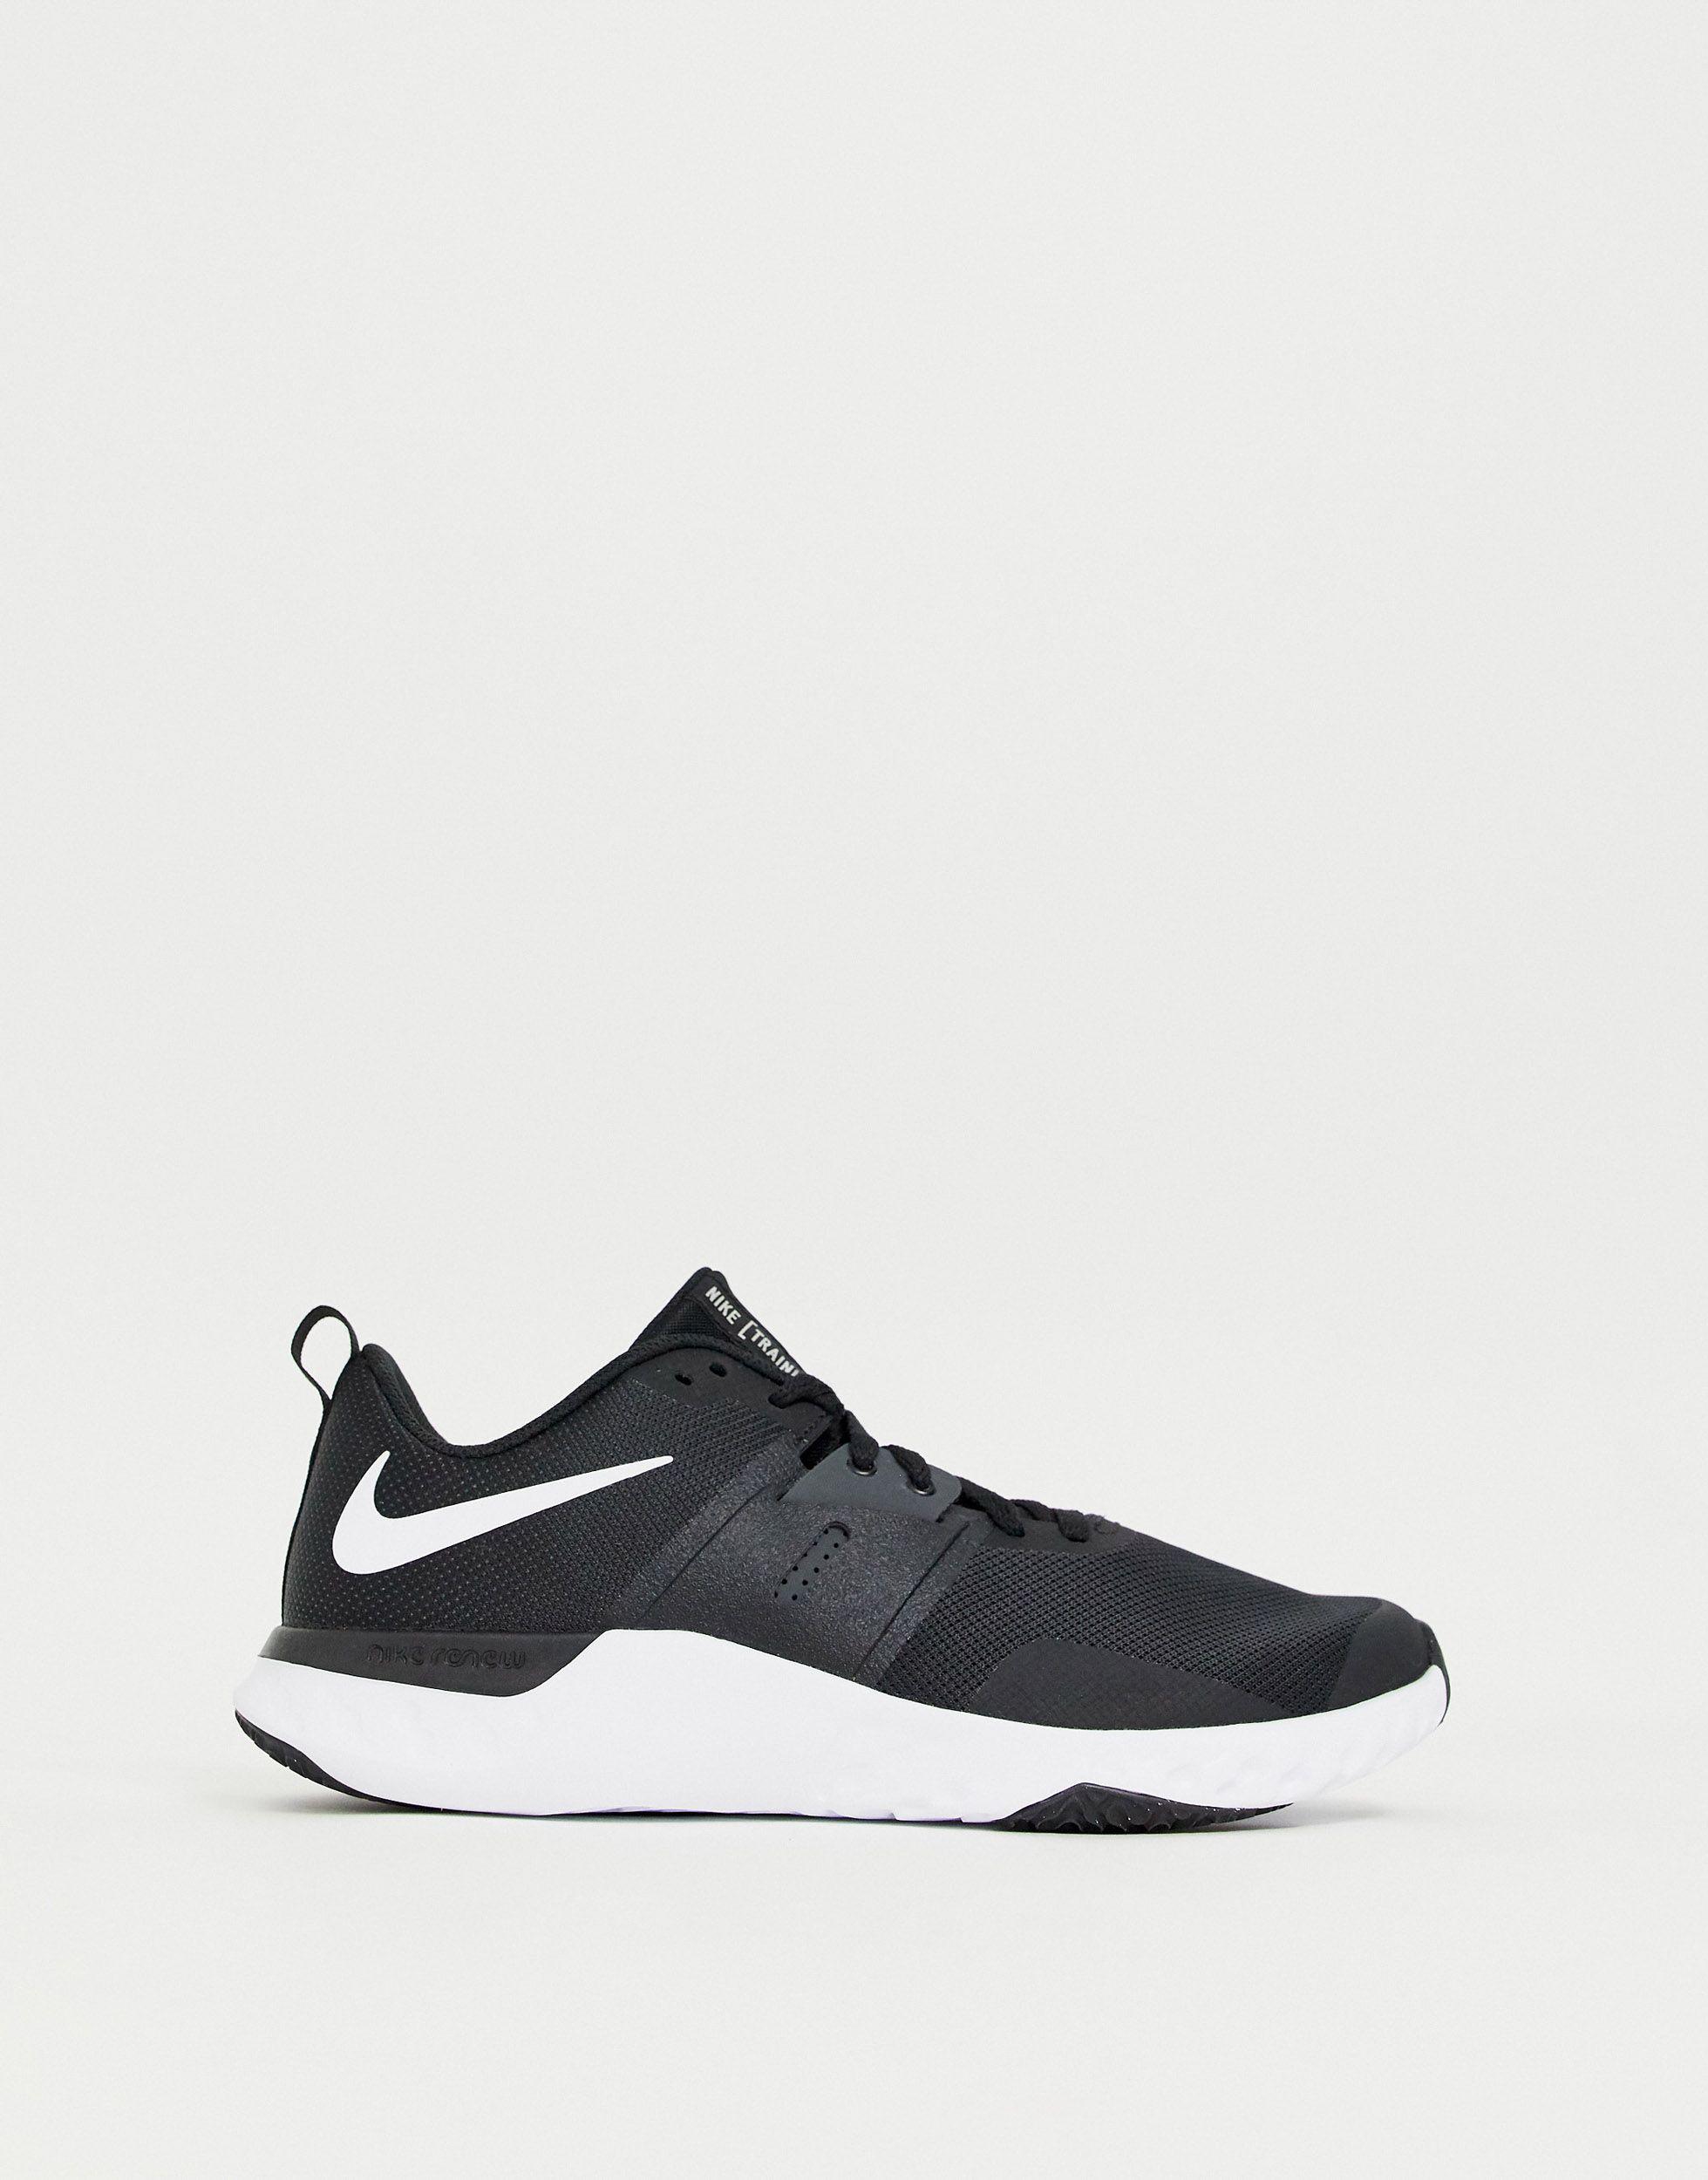 Nike Lace Renew Retaliation Tr 2 Training Shoes in Black,Cool Grey,White  (Black) for Men - Save 42% | Lyst